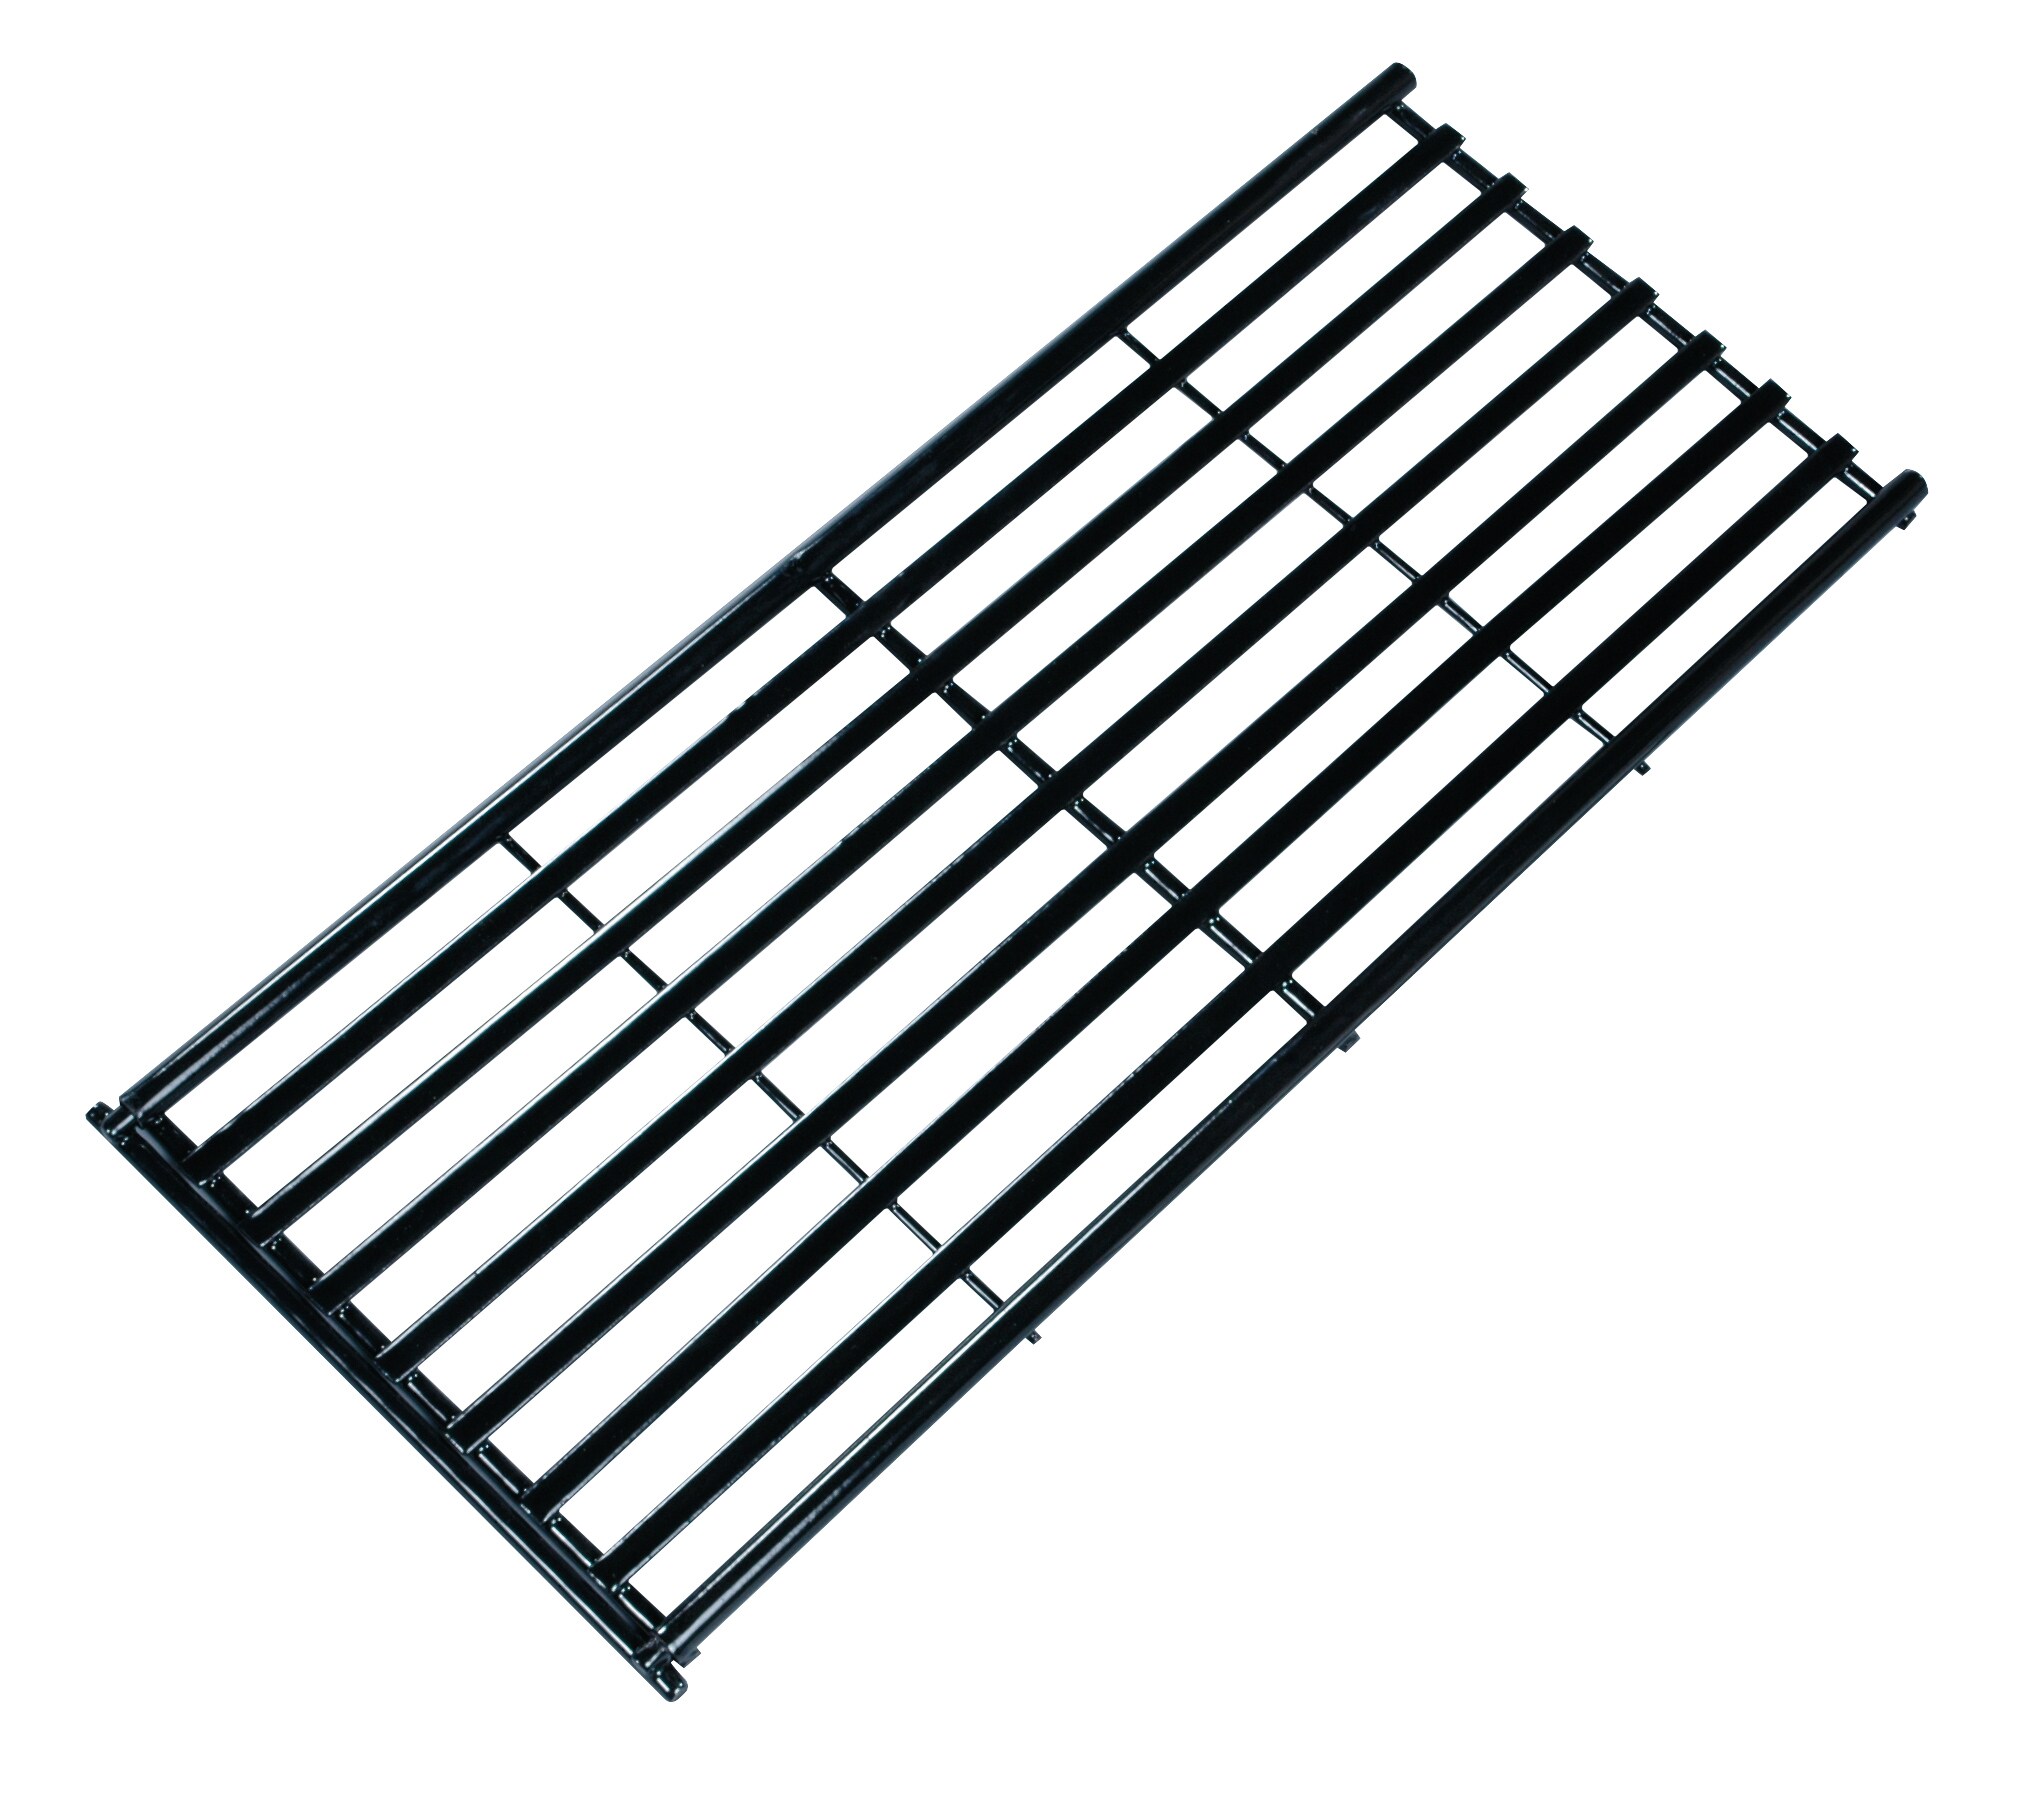 Details about   17 In Cooking Grates Replacement Parts For Charbroil Tru Infrared Grill Lowes 3 